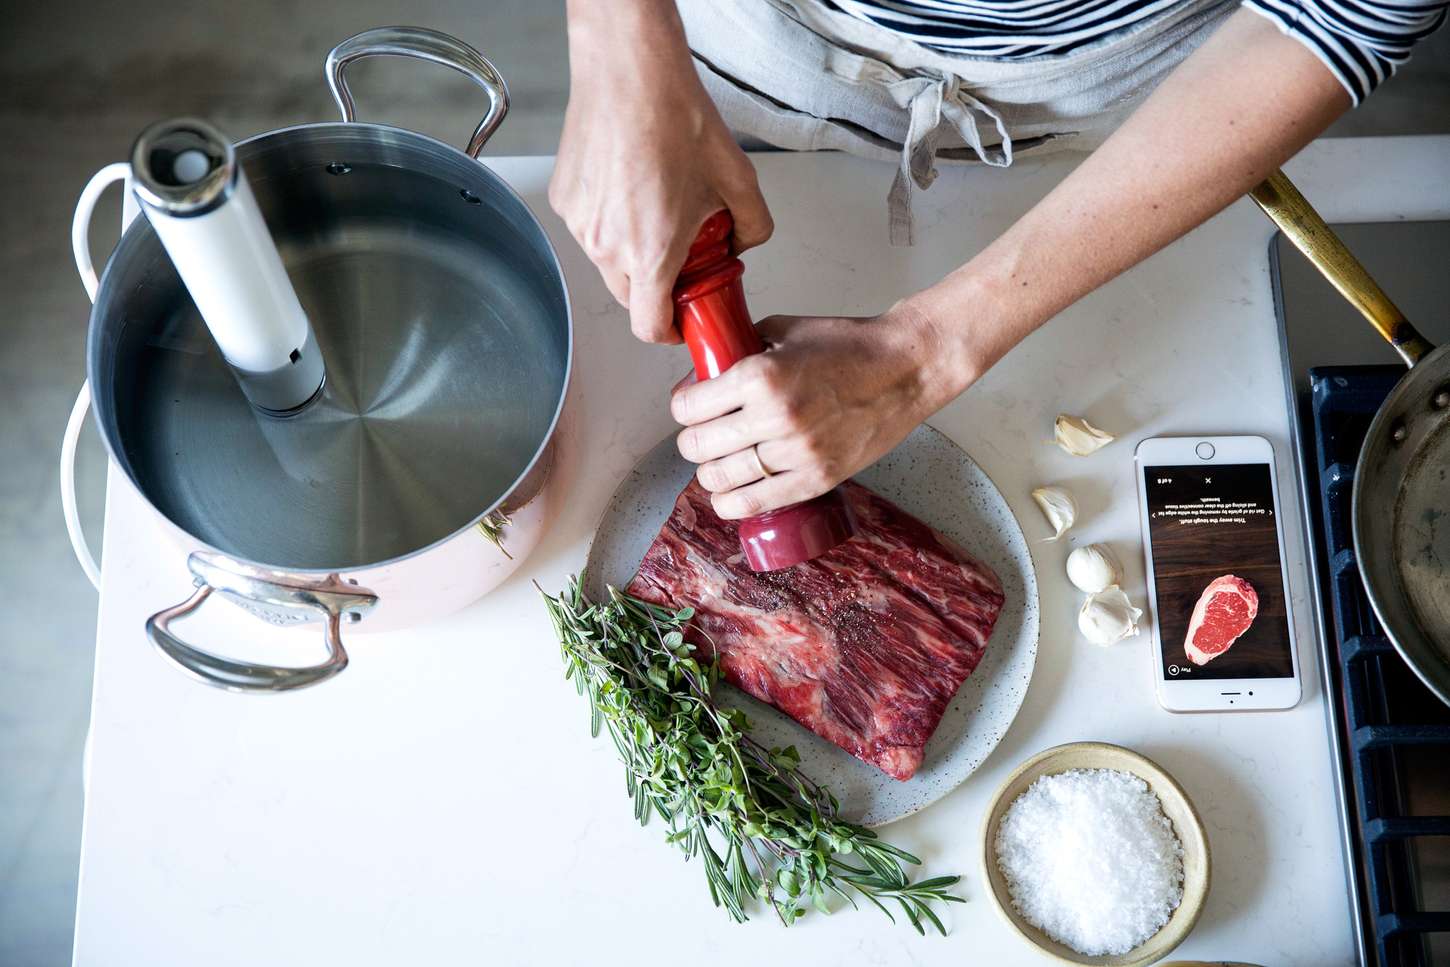 Sous Vide: A Step-by-Step Guide